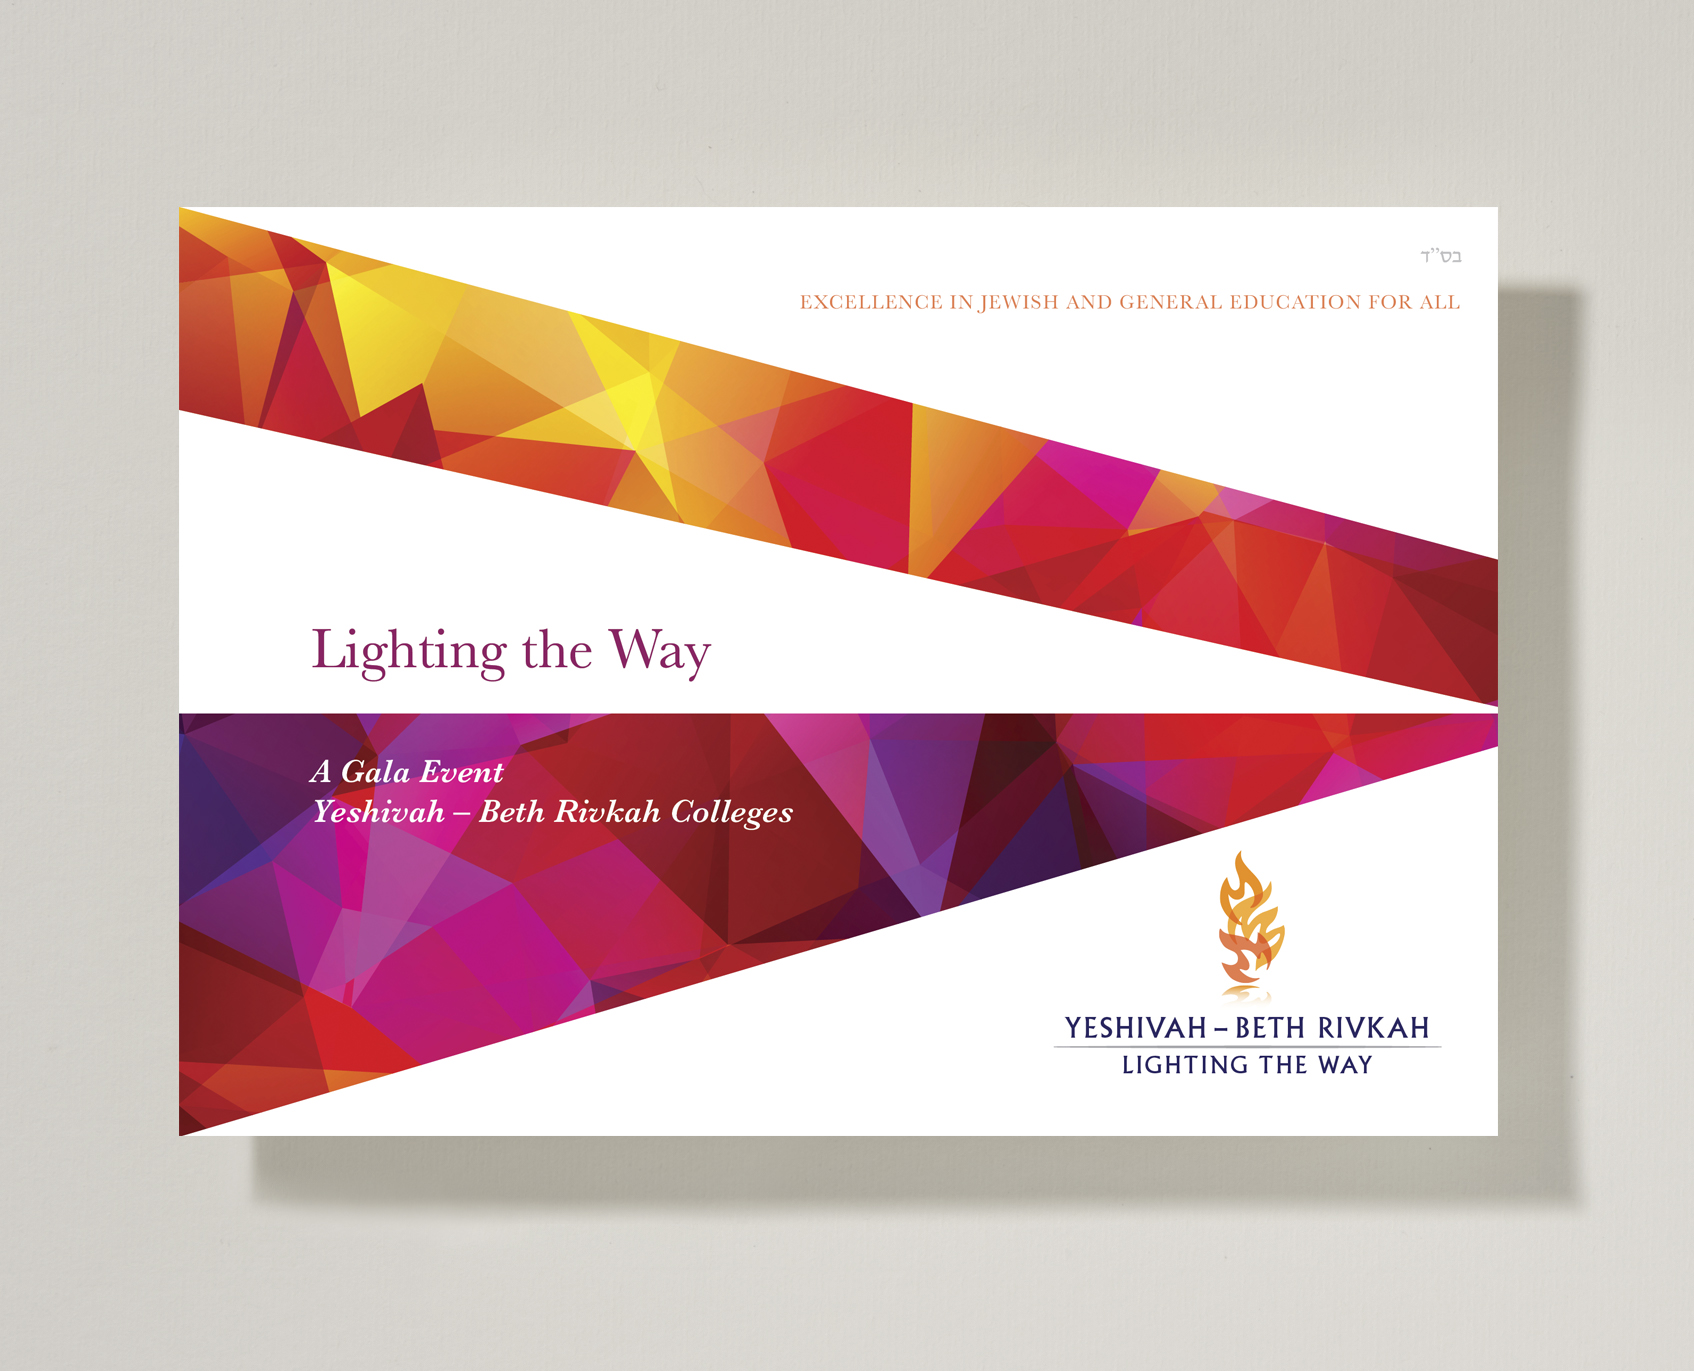 Yeshivah-Beth Rivkah Colleges required design collateral for a fundraising event. A concept was developed - Lighting the Way - based on the concept of education and the Torah as a guiding light. The symbol itself is a reference to the Ner Tamid a continuously burning lamp, which is situated above the Ark in the synagogue. The colourful patterning. and angles mimic beams of light projecting and reflecting and are reminiscent of modern stained glass. The rich coloured panels next to white made for a fresh, clean vivid look and feel.